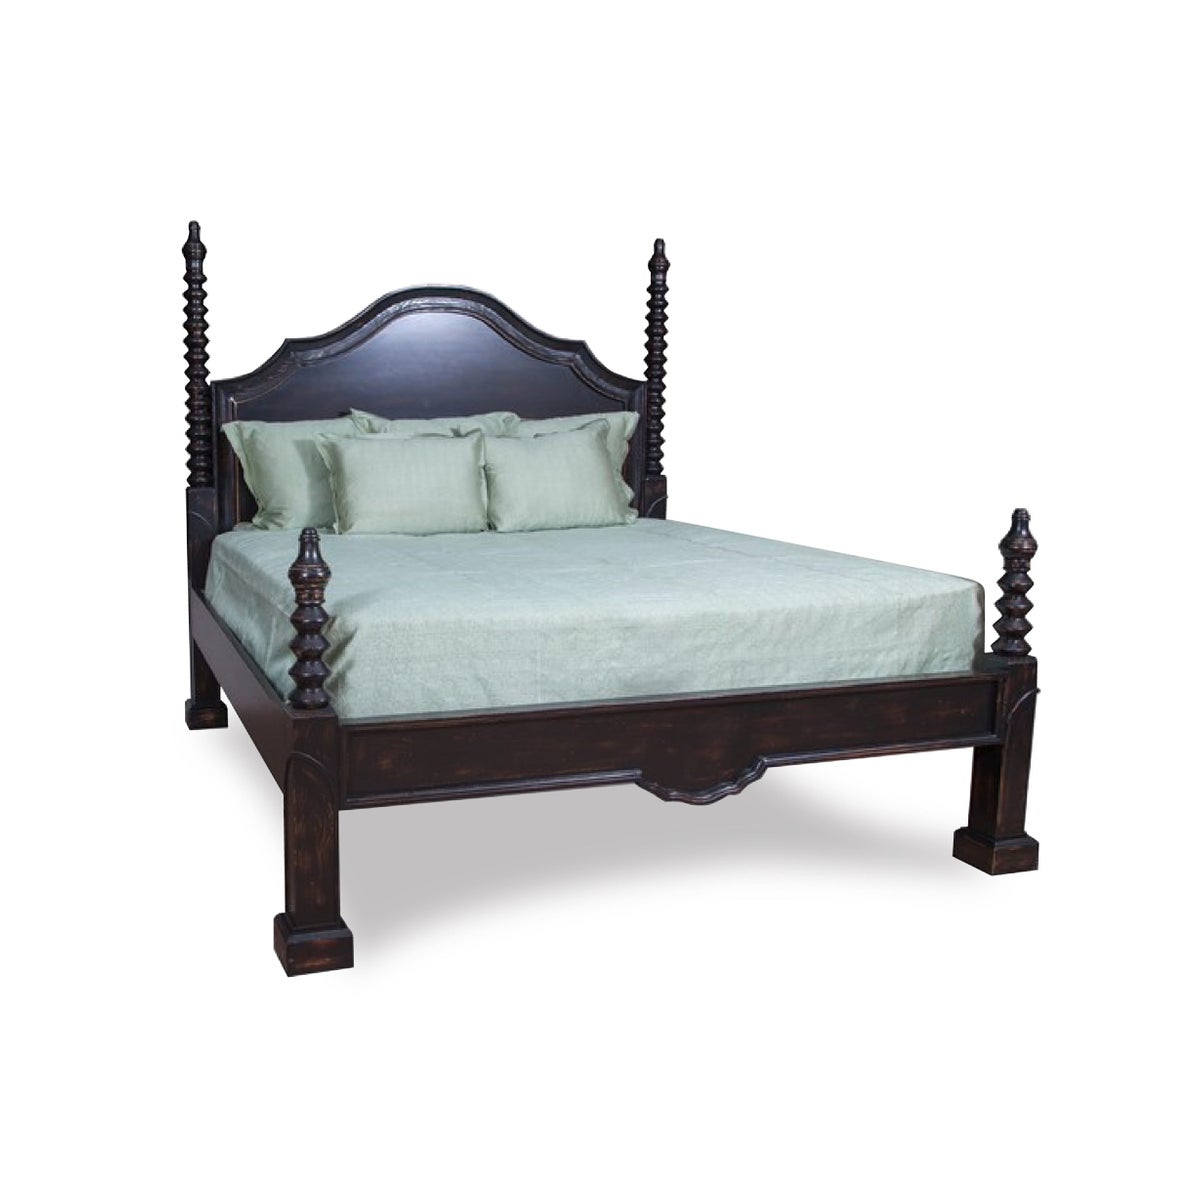 Granada Bed King (All Wood) Rubbed Black